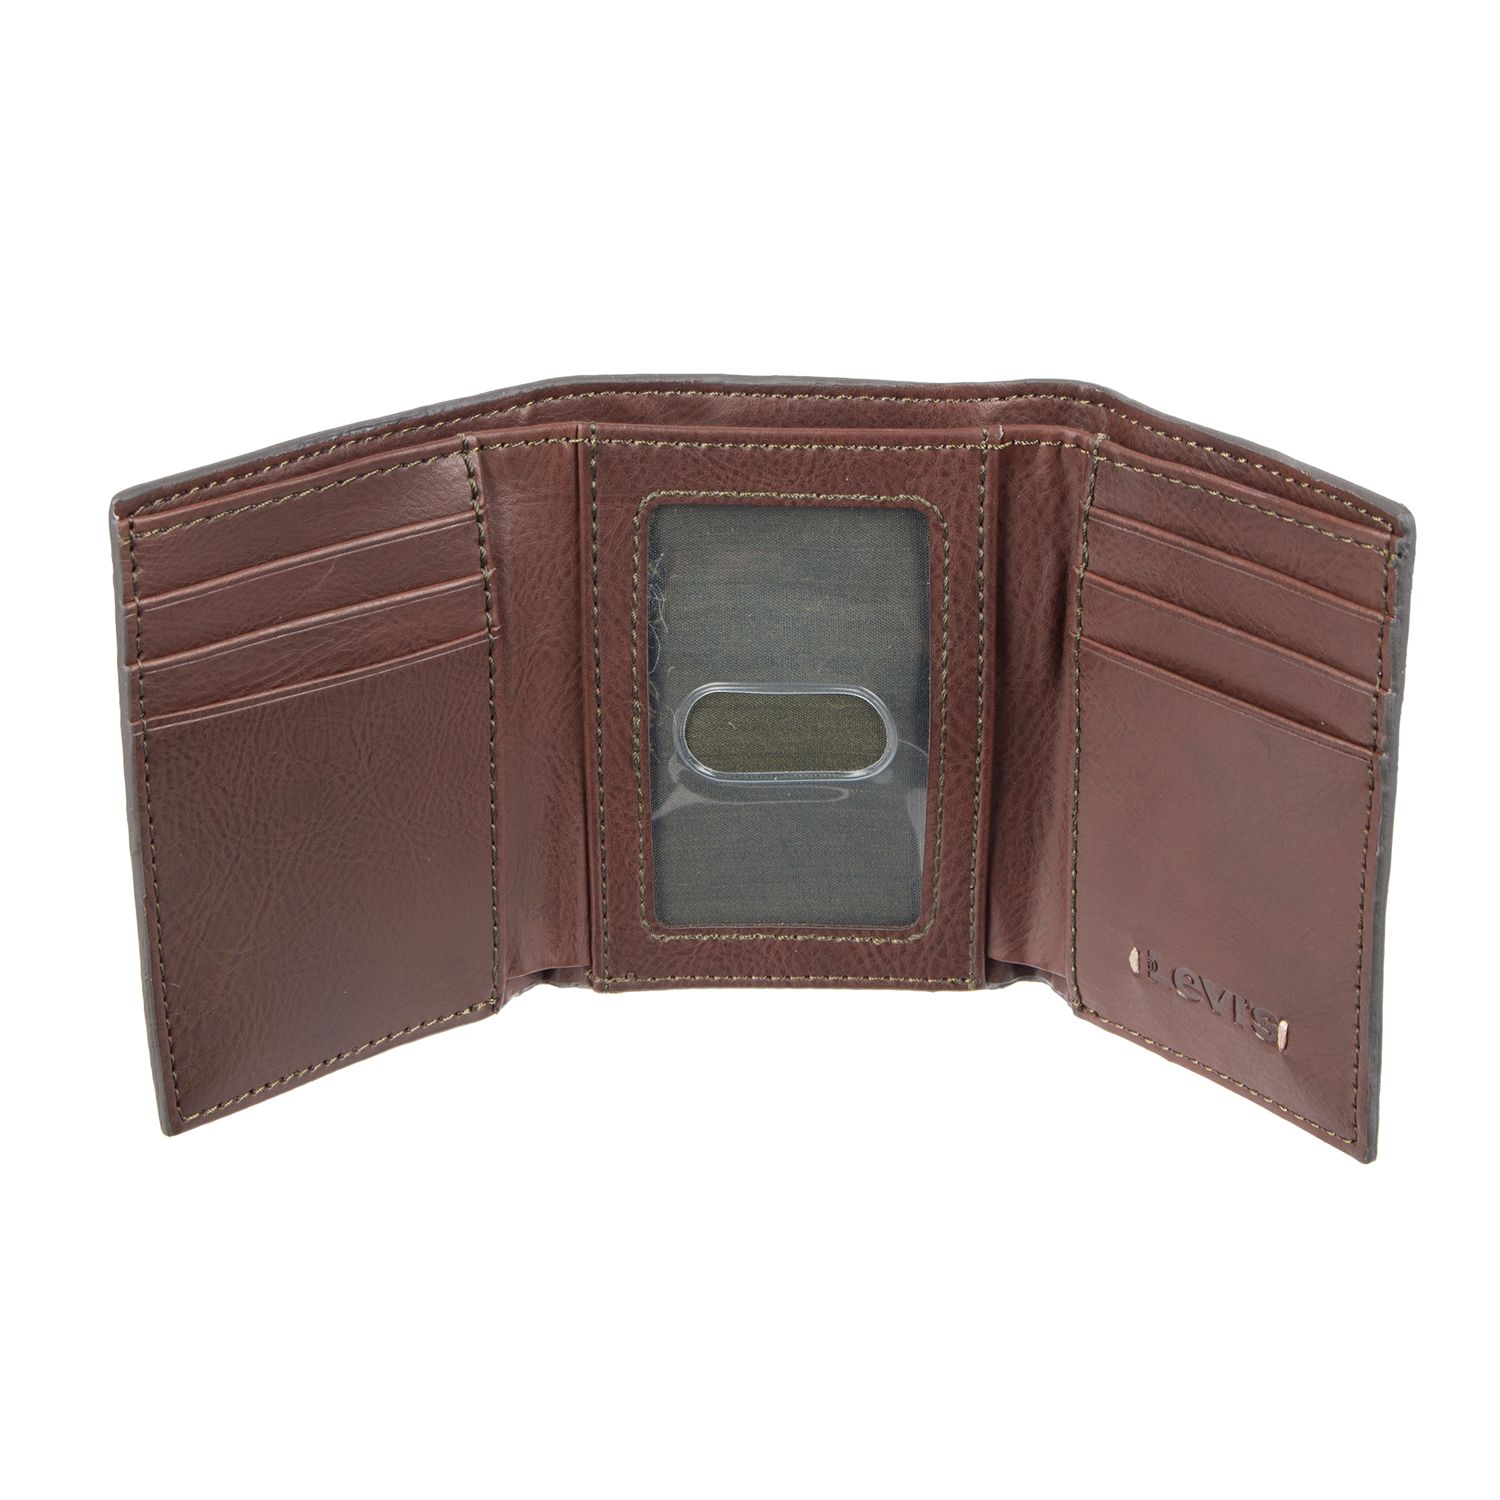 levi's trifold wallet